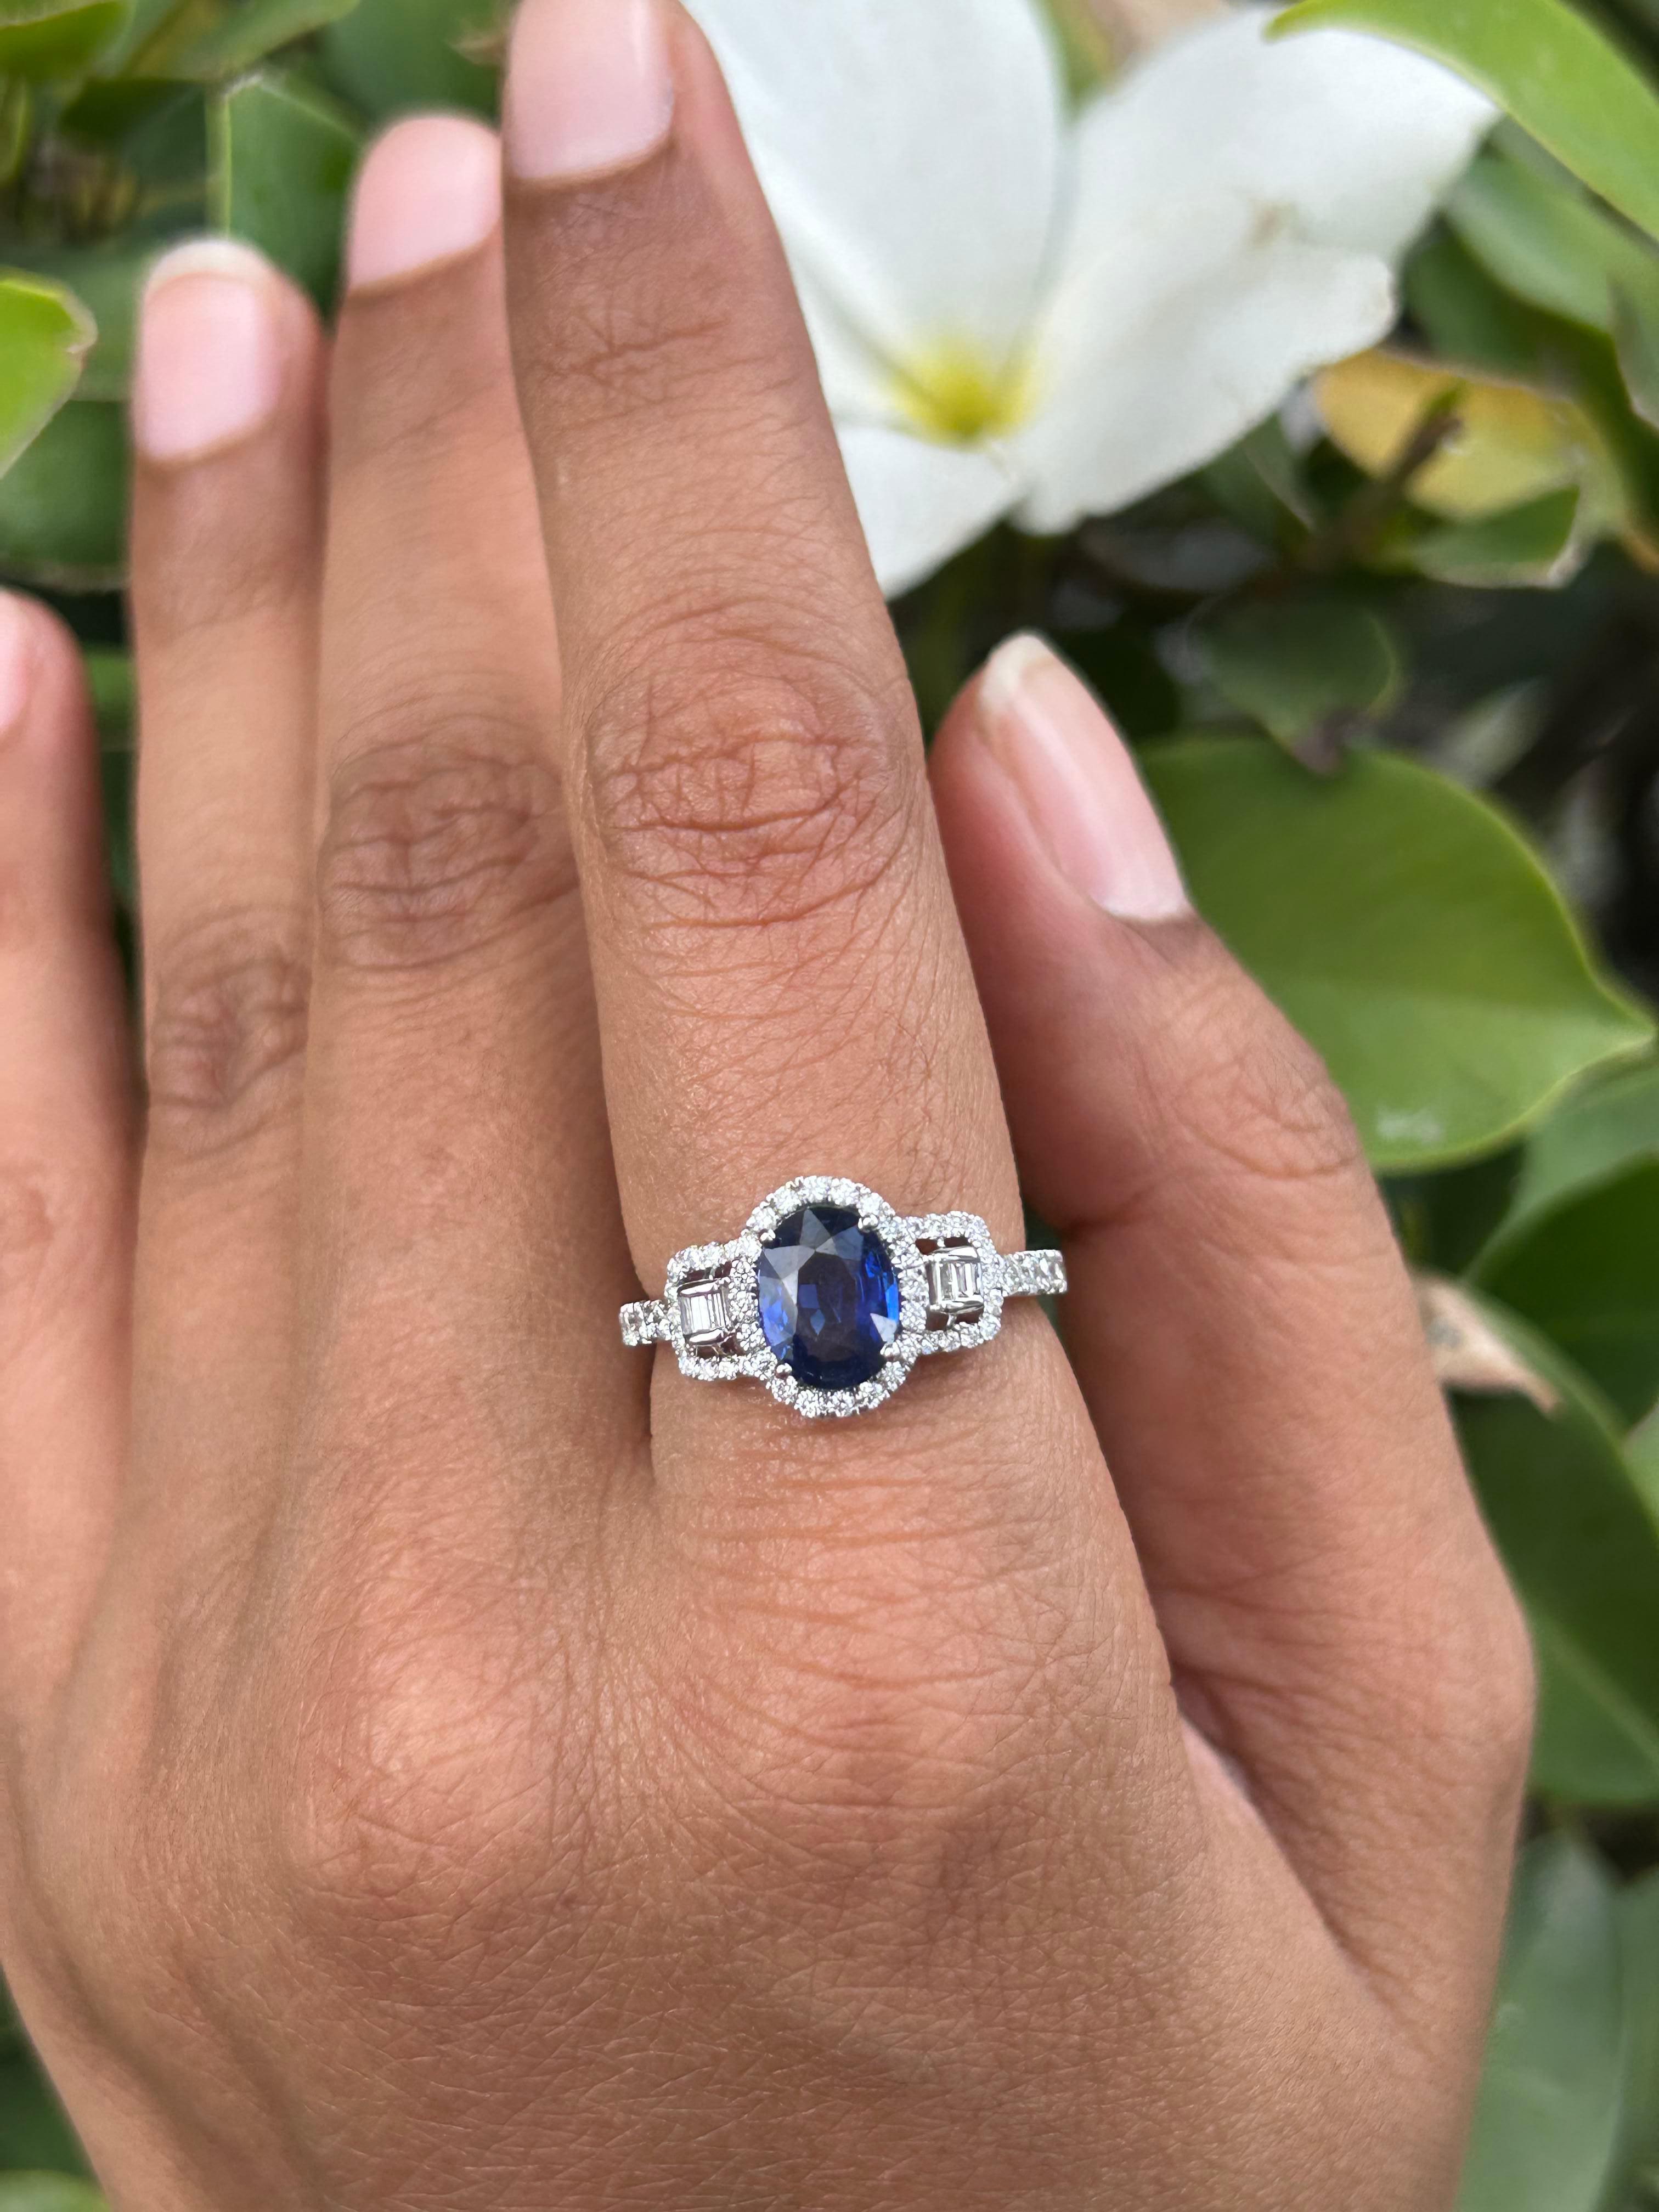 For Sale:  18k Solid White Gold Faceted Blue Sapphire Diamond Engagement Ring Certified 6